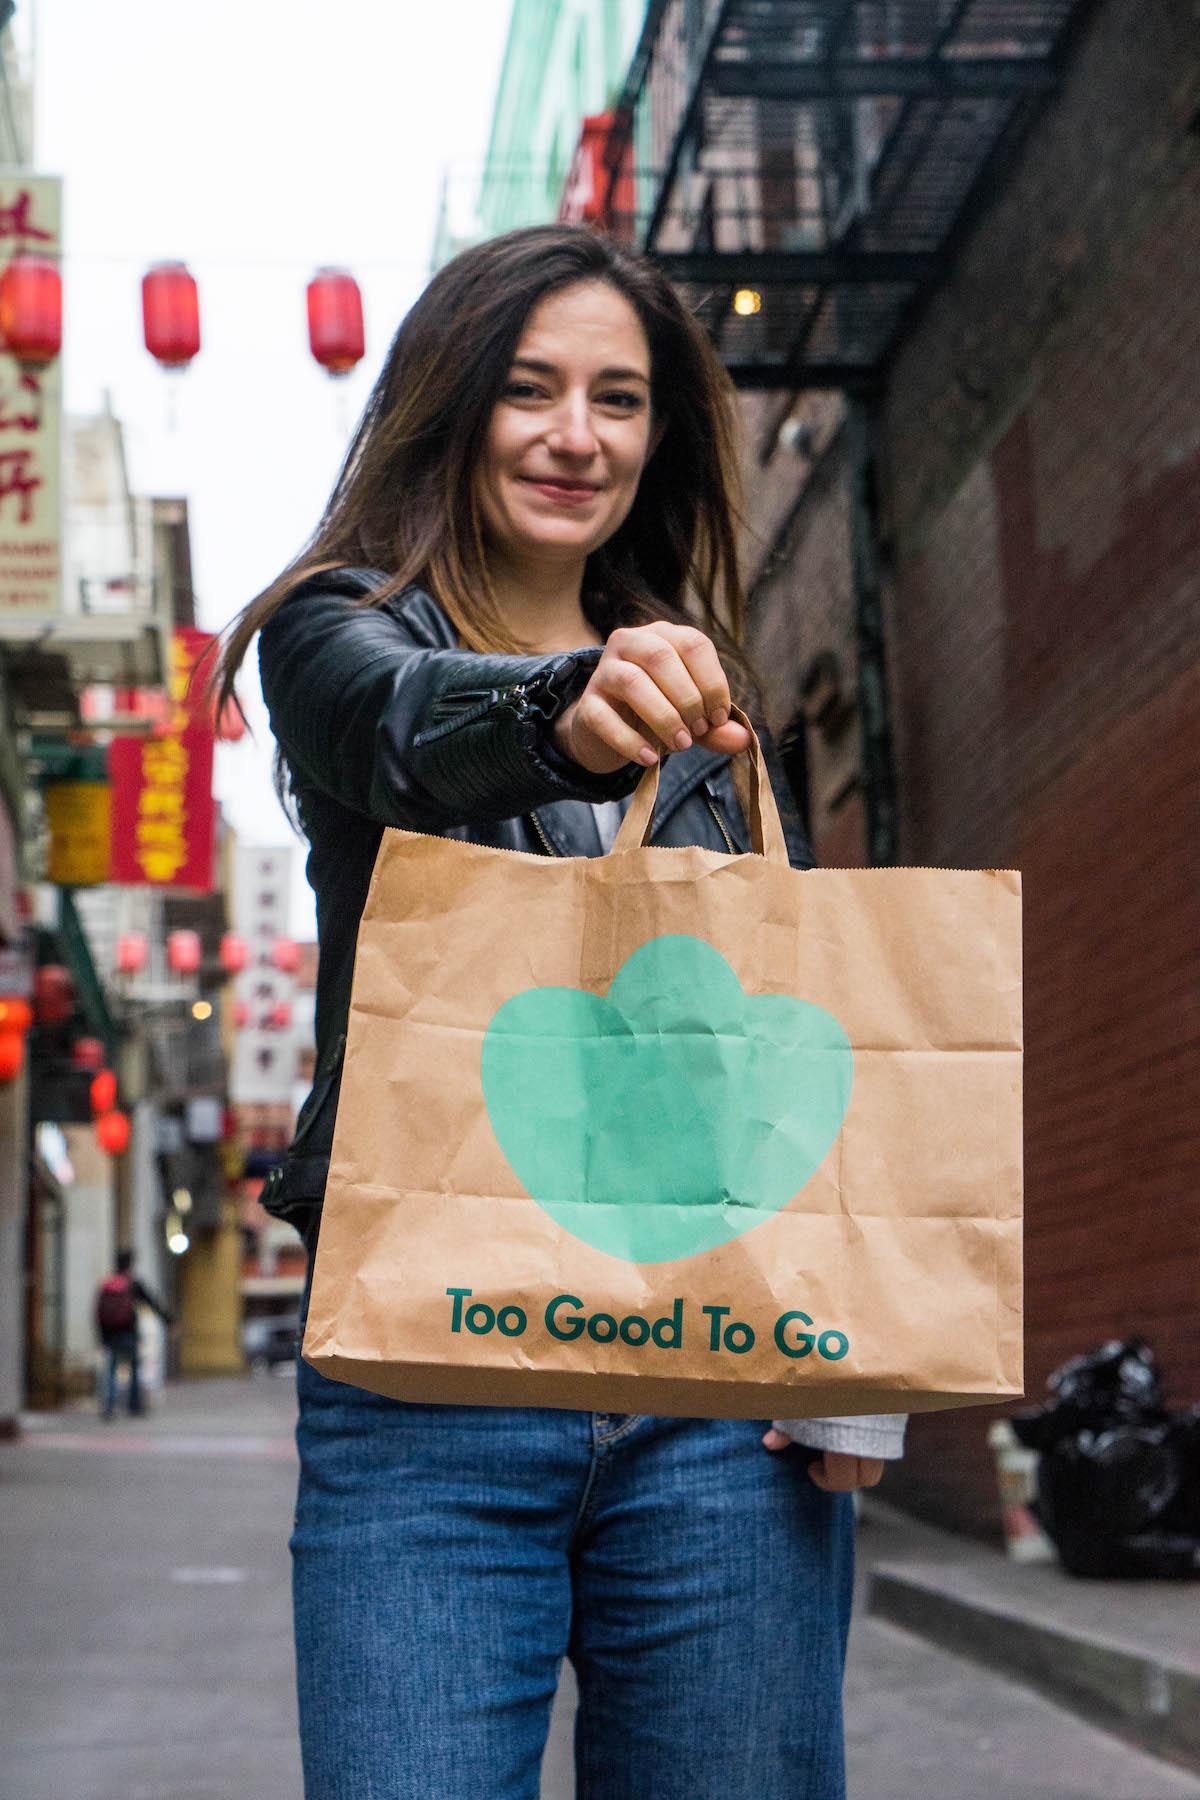 Too Good To Go Expands In The United States, Another Example Of A